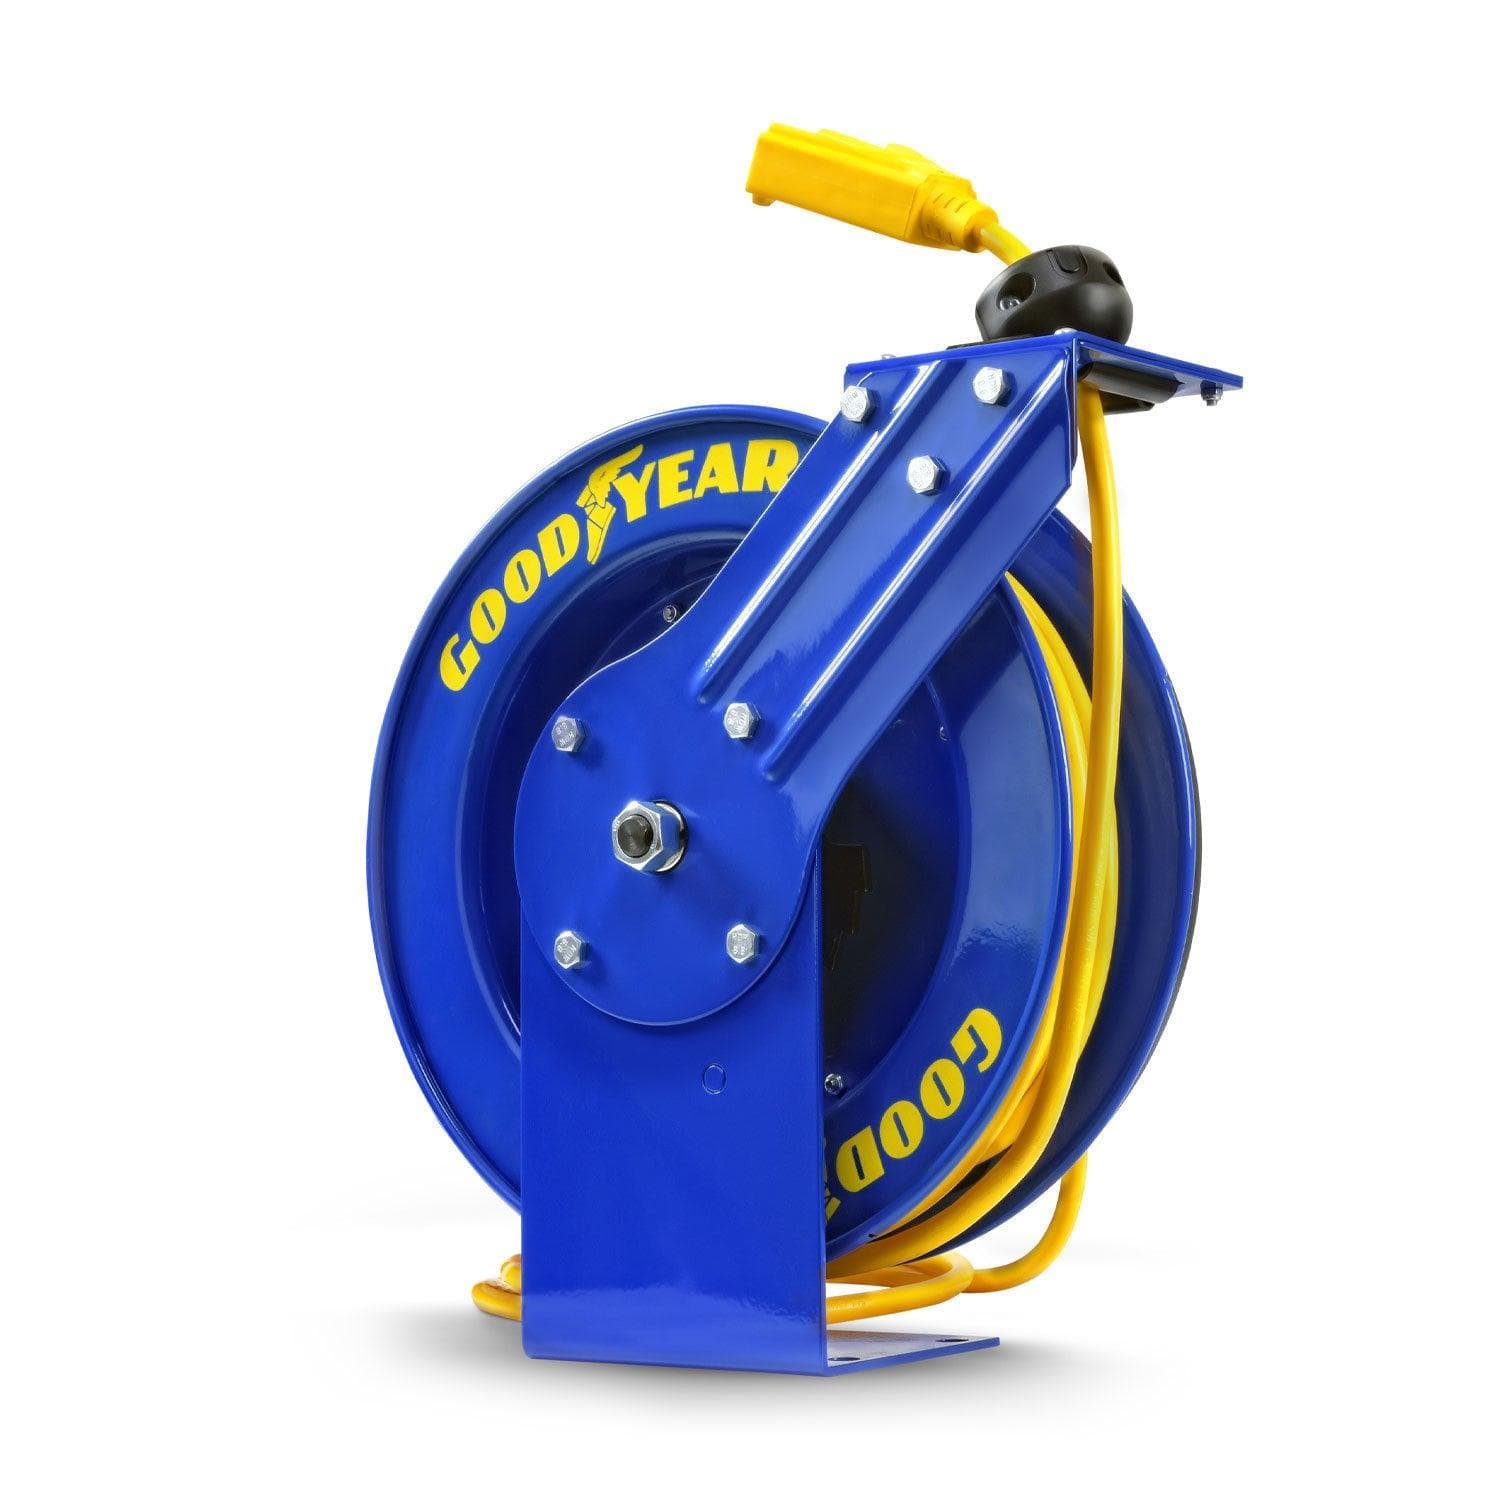 Goodyear Industrial Retractable Extension Cord Reel - 14AWG x 100' Ft, 3  Grounded Outlets, Max 13A